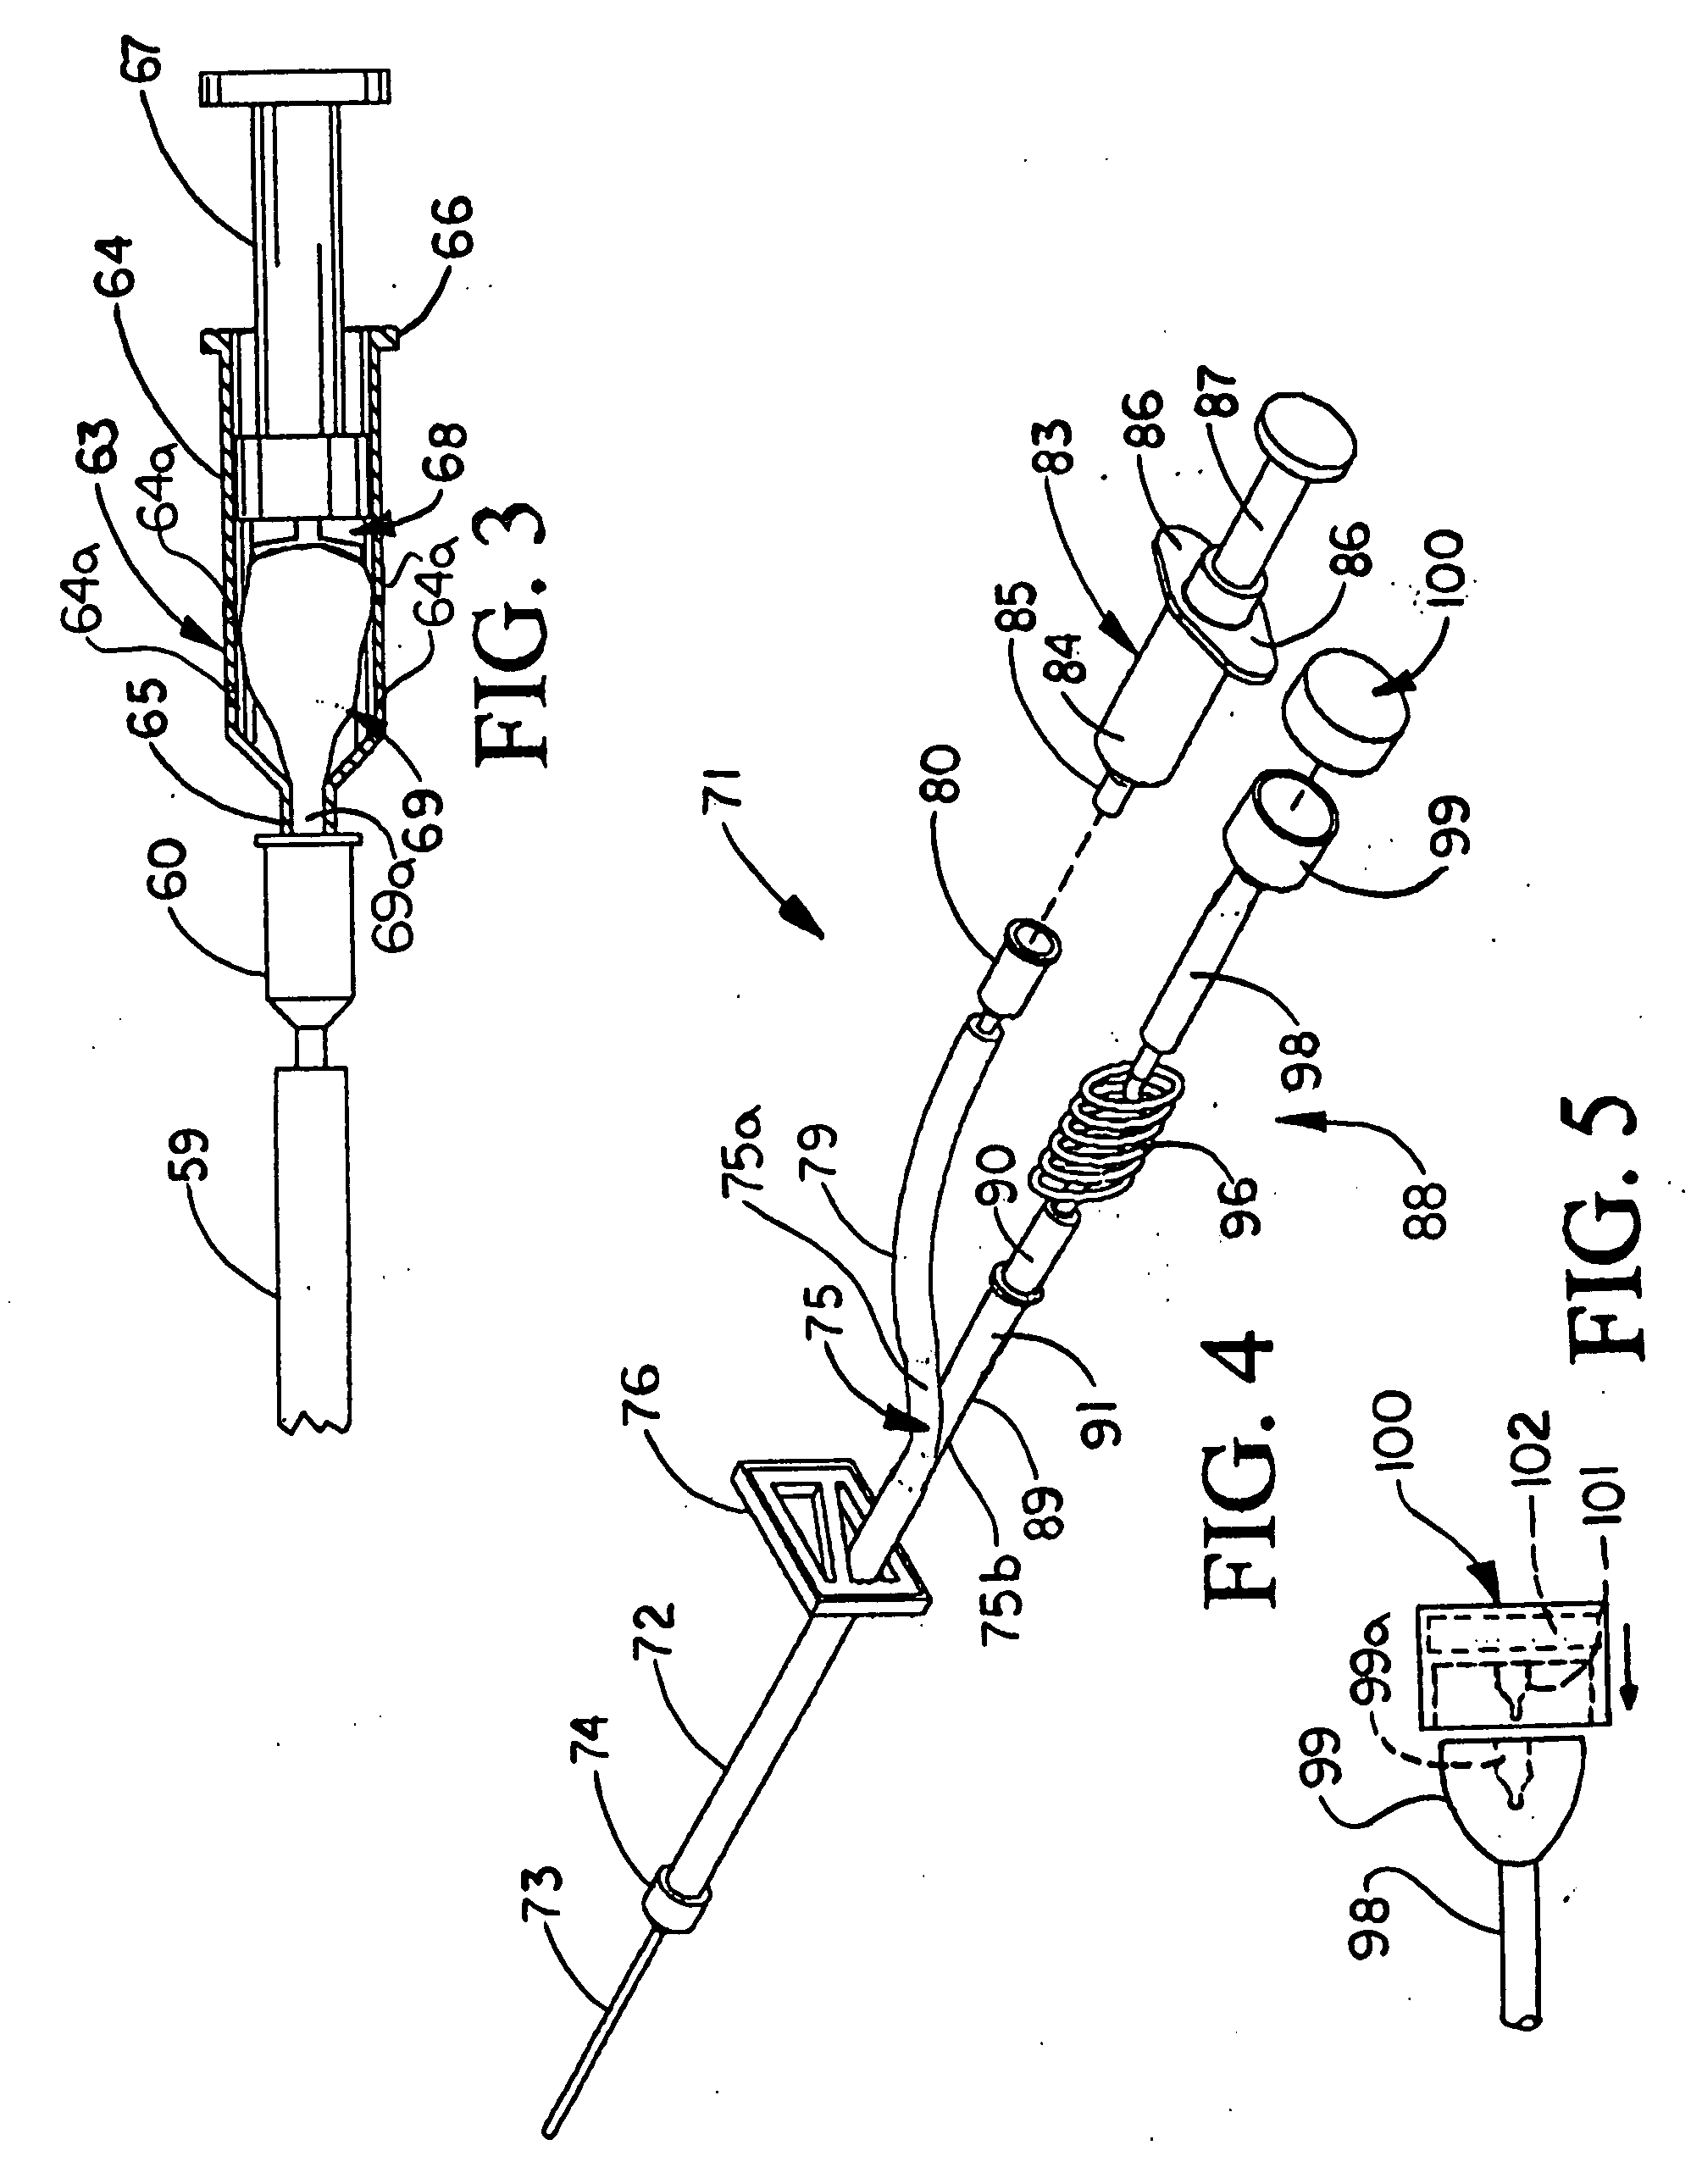 Devices for collecting blood and administering medical fluids